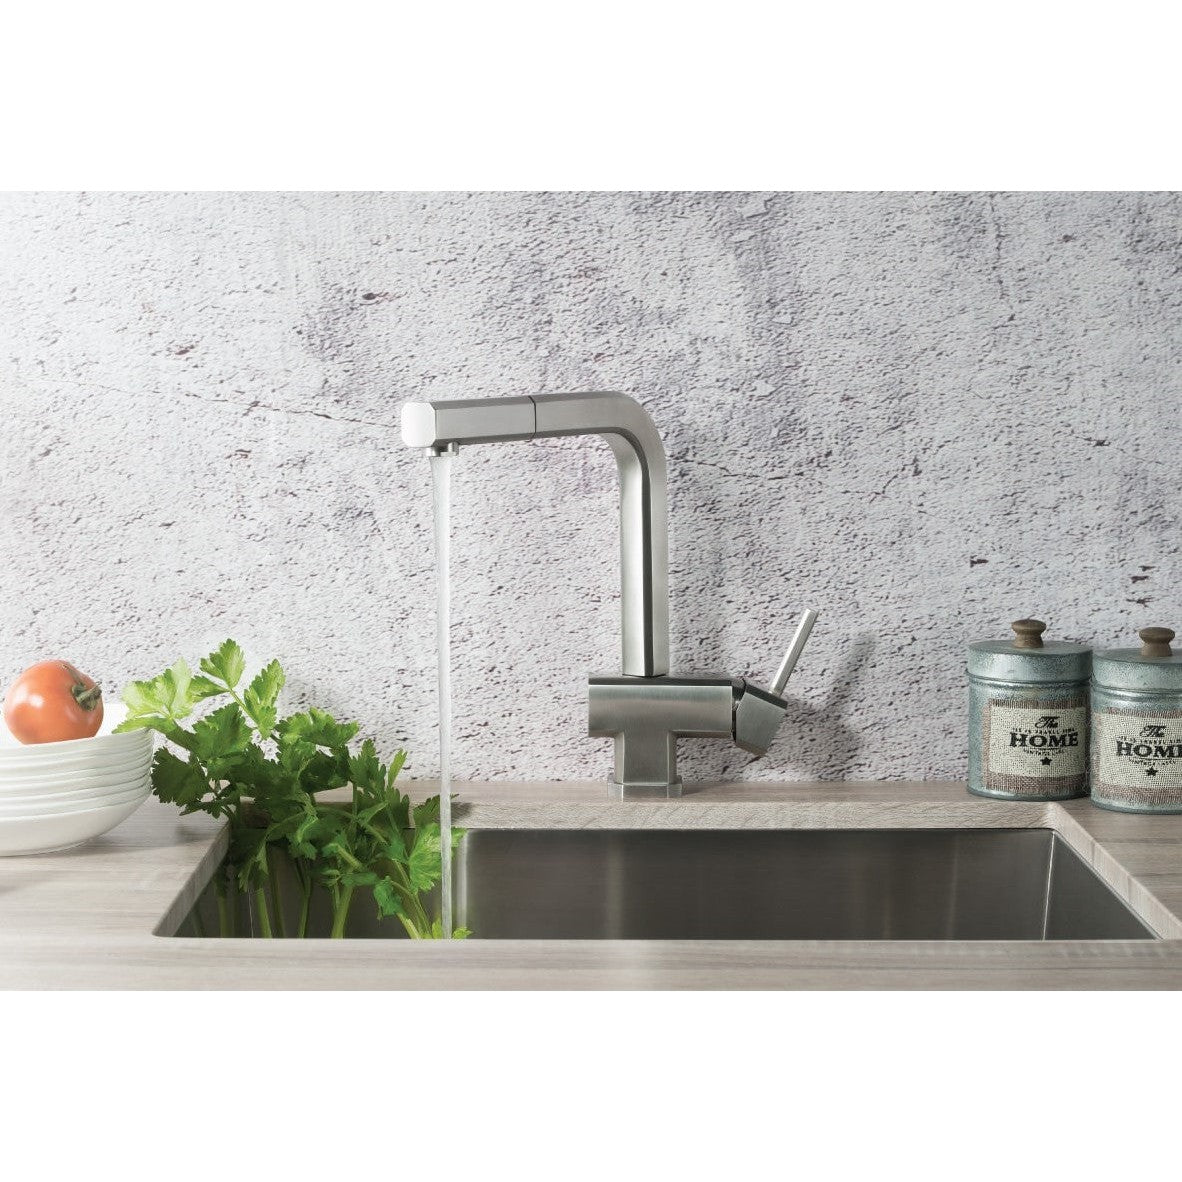 Isenberg Klassiker Cito 11" Single Hole Polished Steel Stainless Steel Pull-Out Kitchen Faucet With Dual Function Sprayer